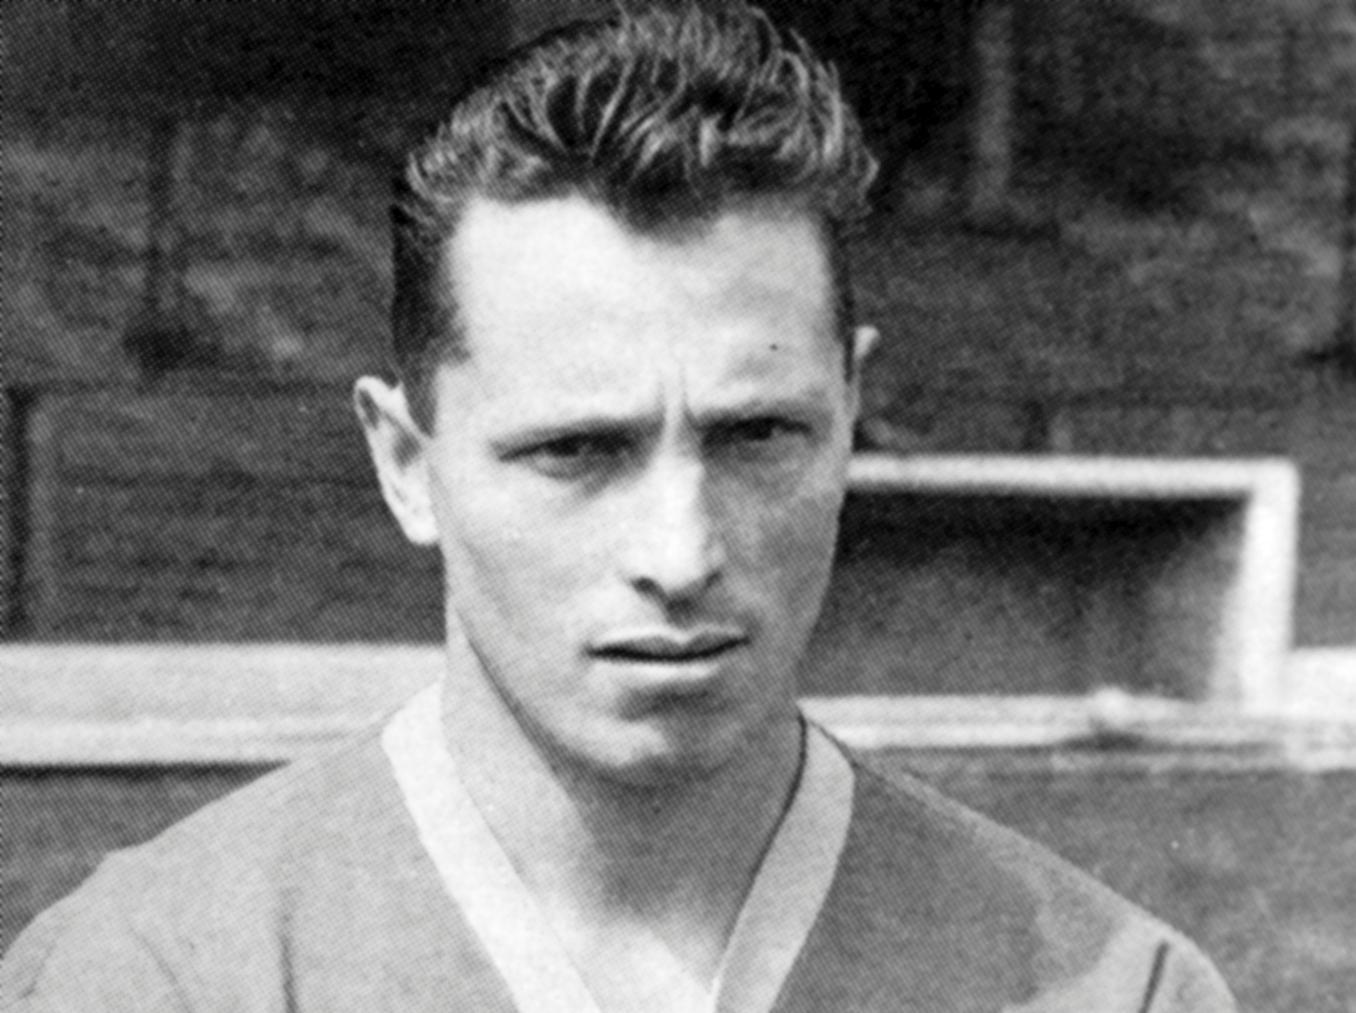 The magnificently named left-back, who was a one-club man and tragically died at the tender age of 36, made 104 consecutive appearances for Leeds in the mid 1950s